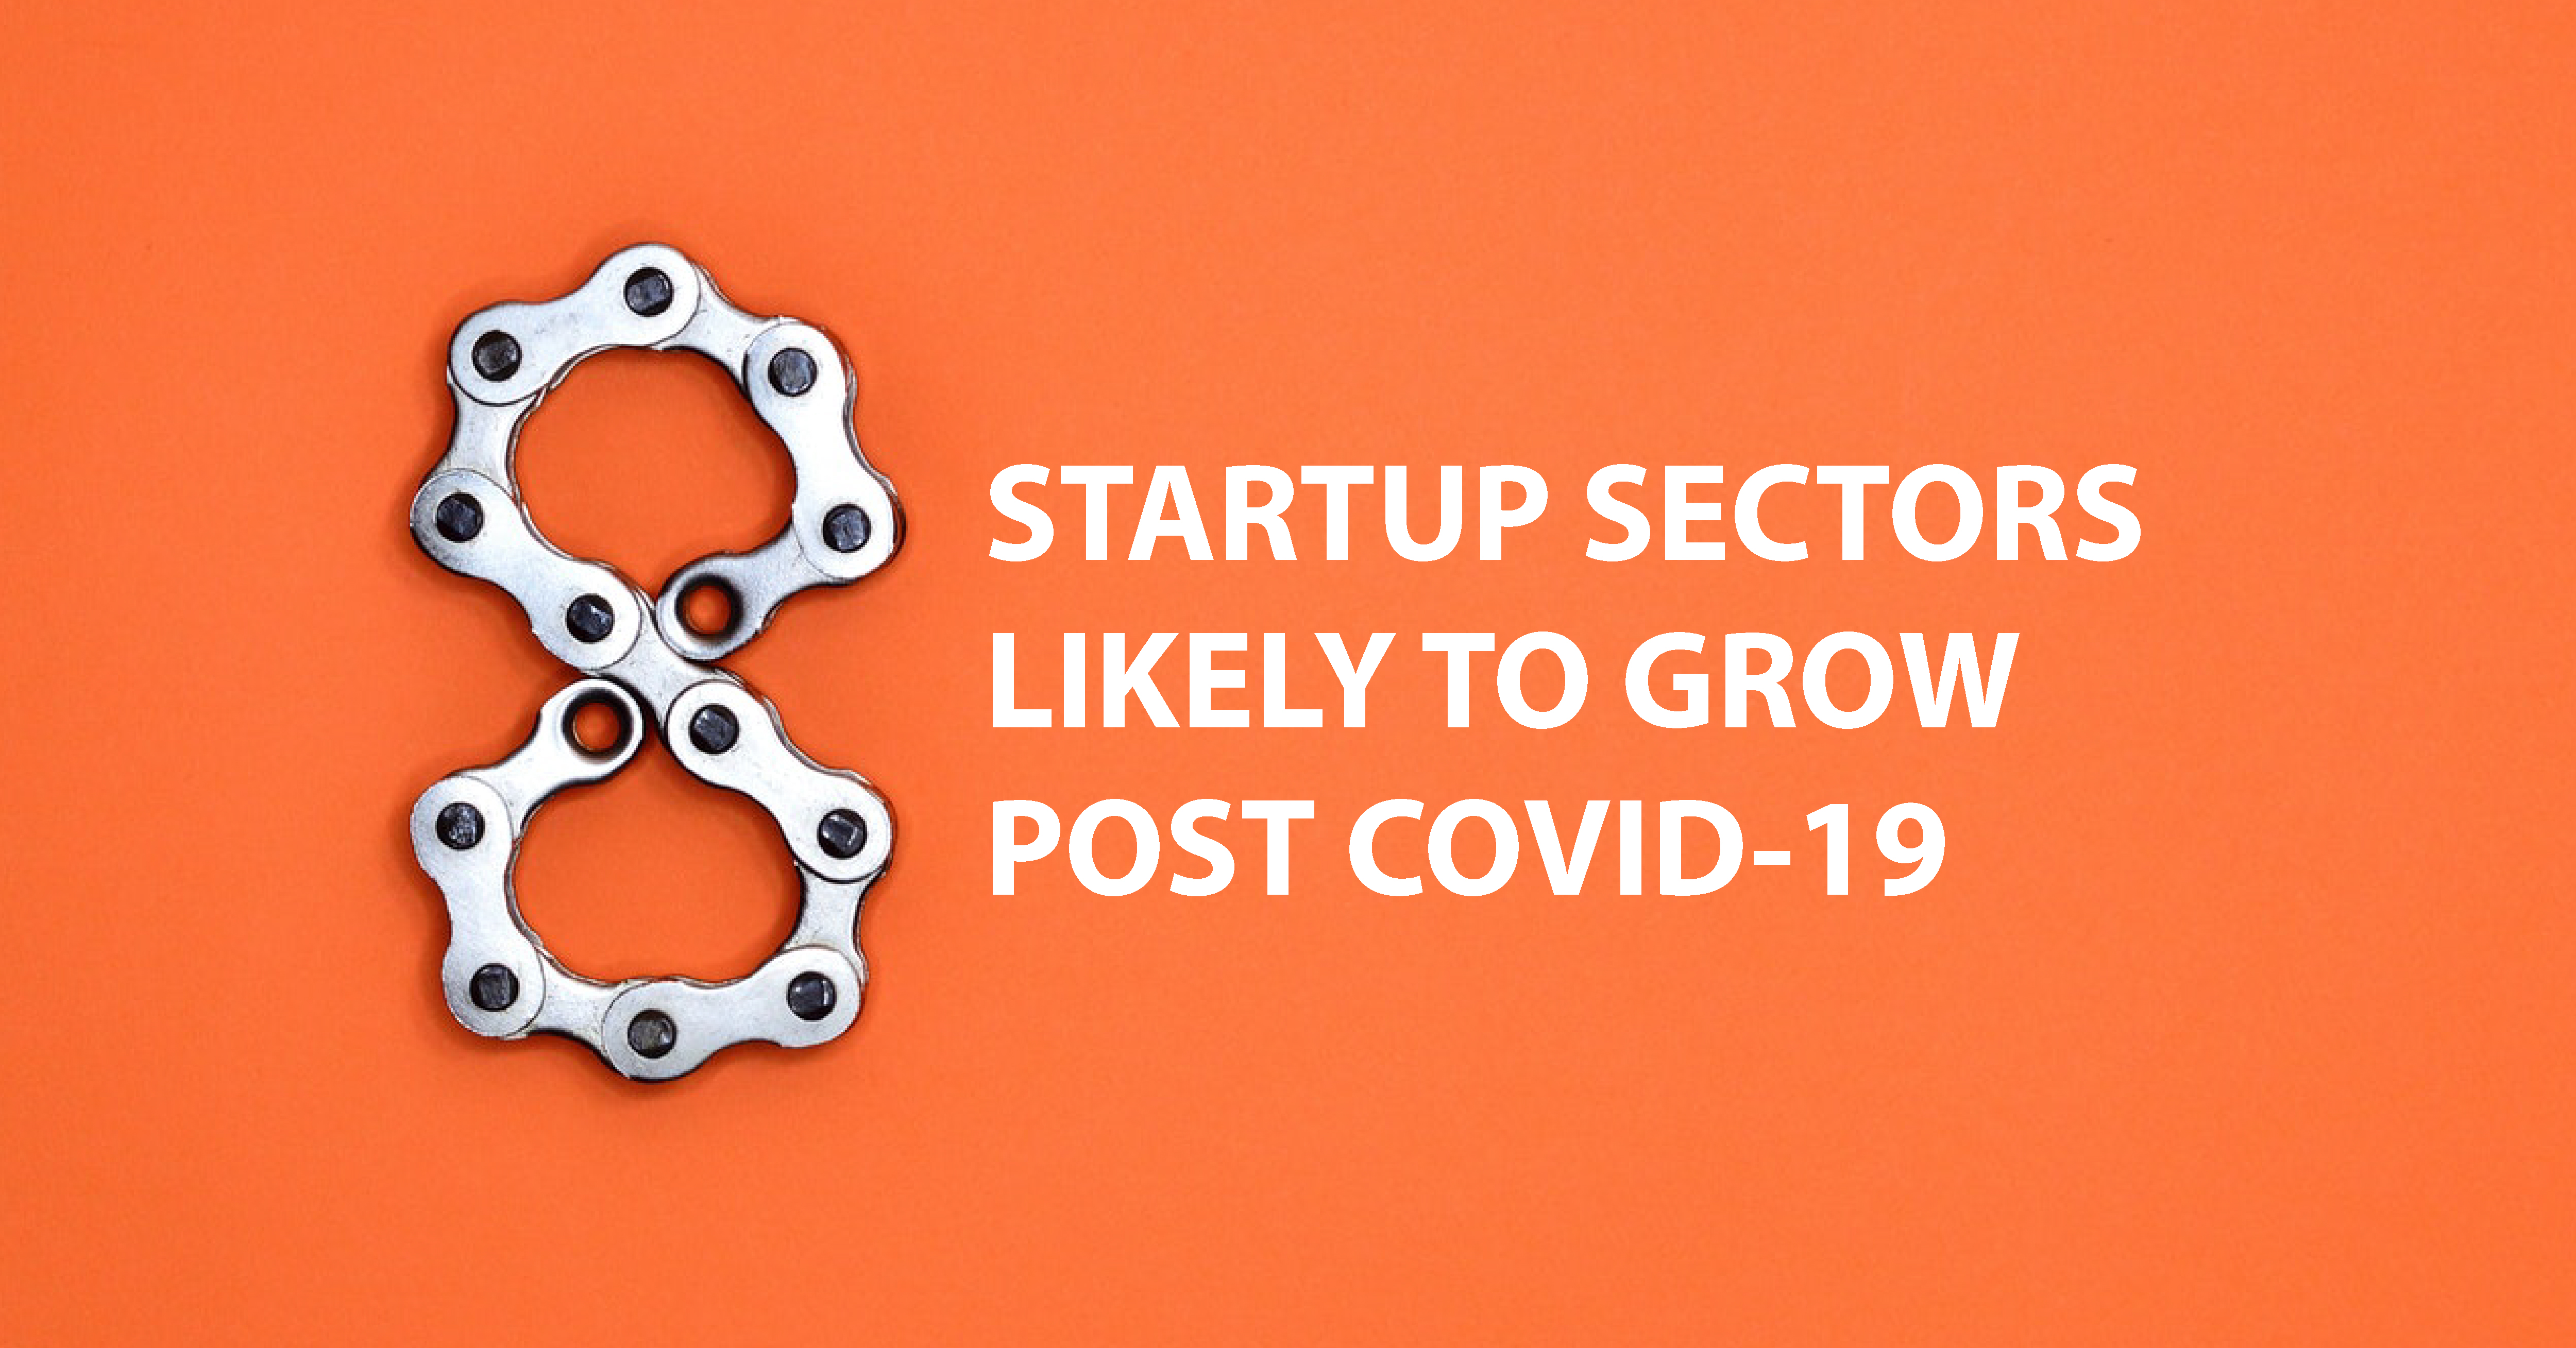 Top 8 Startup Sectors Likely To Grow Post COVID-19 Pandemic